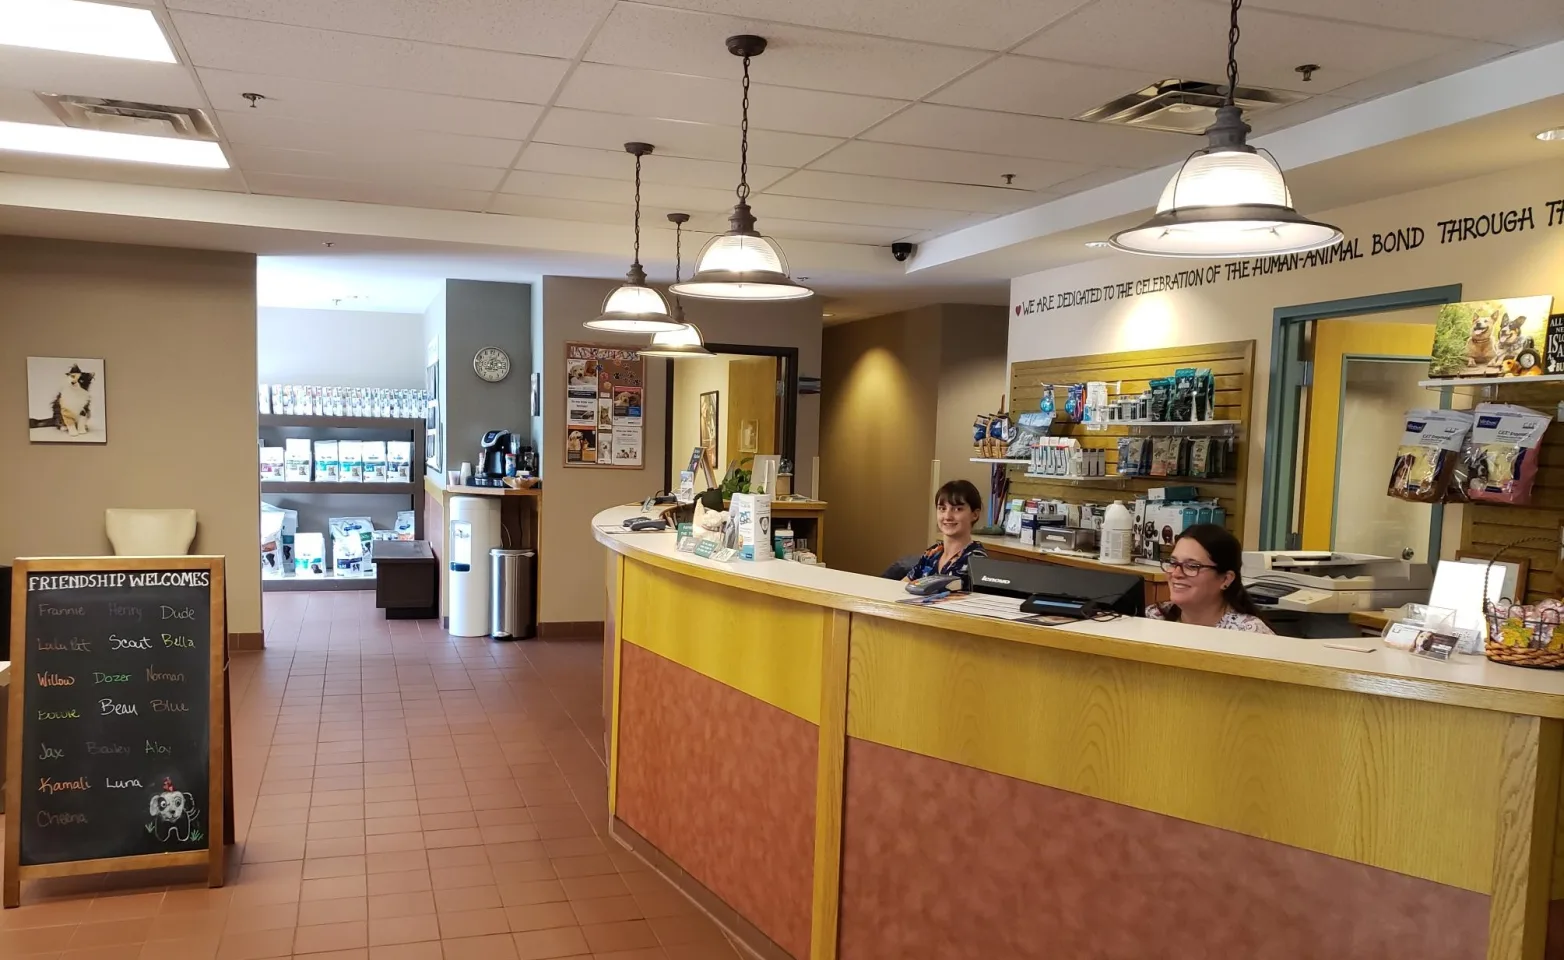 New remodeled and clean lobby at friendship hospital for animals